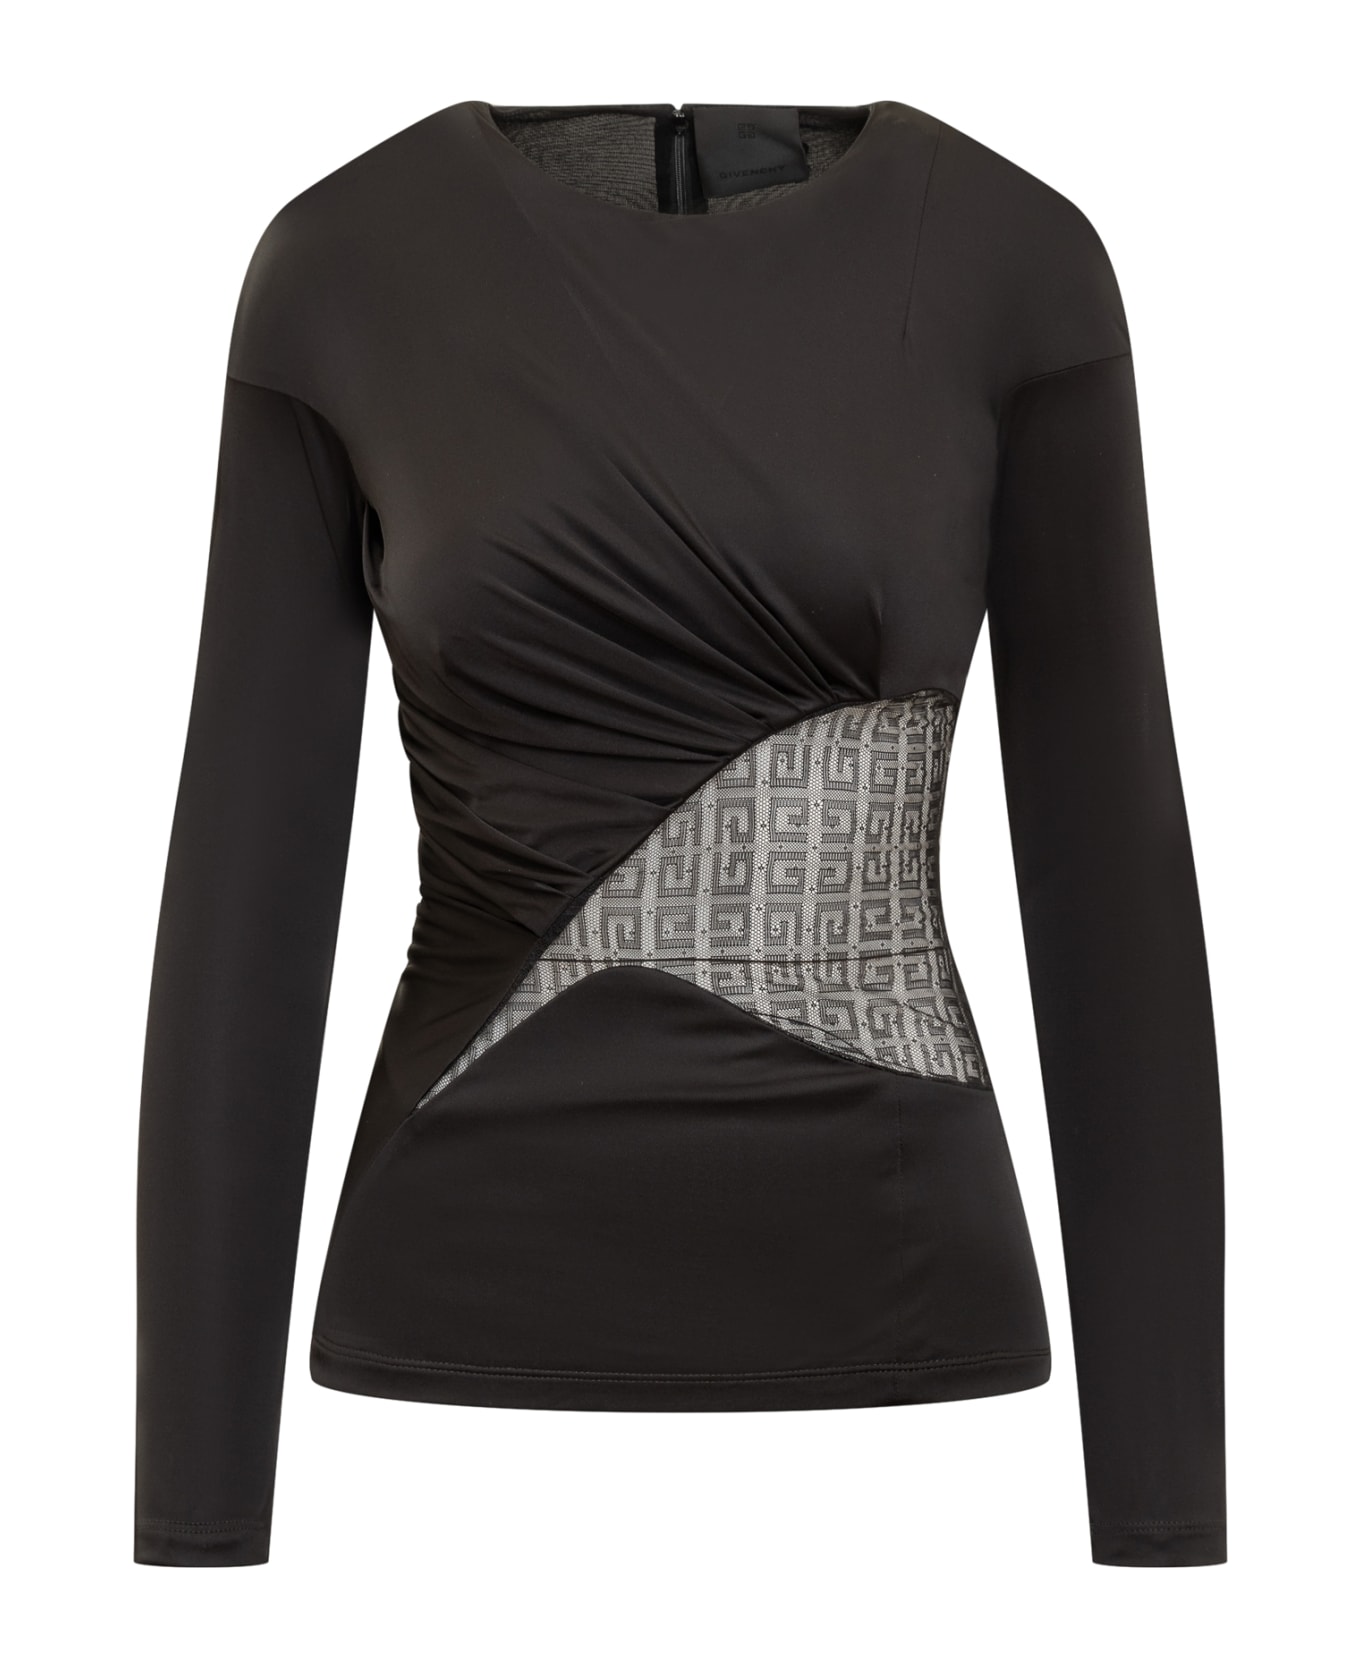 Givenchy Draped Jersey And Lace Top - BLACK